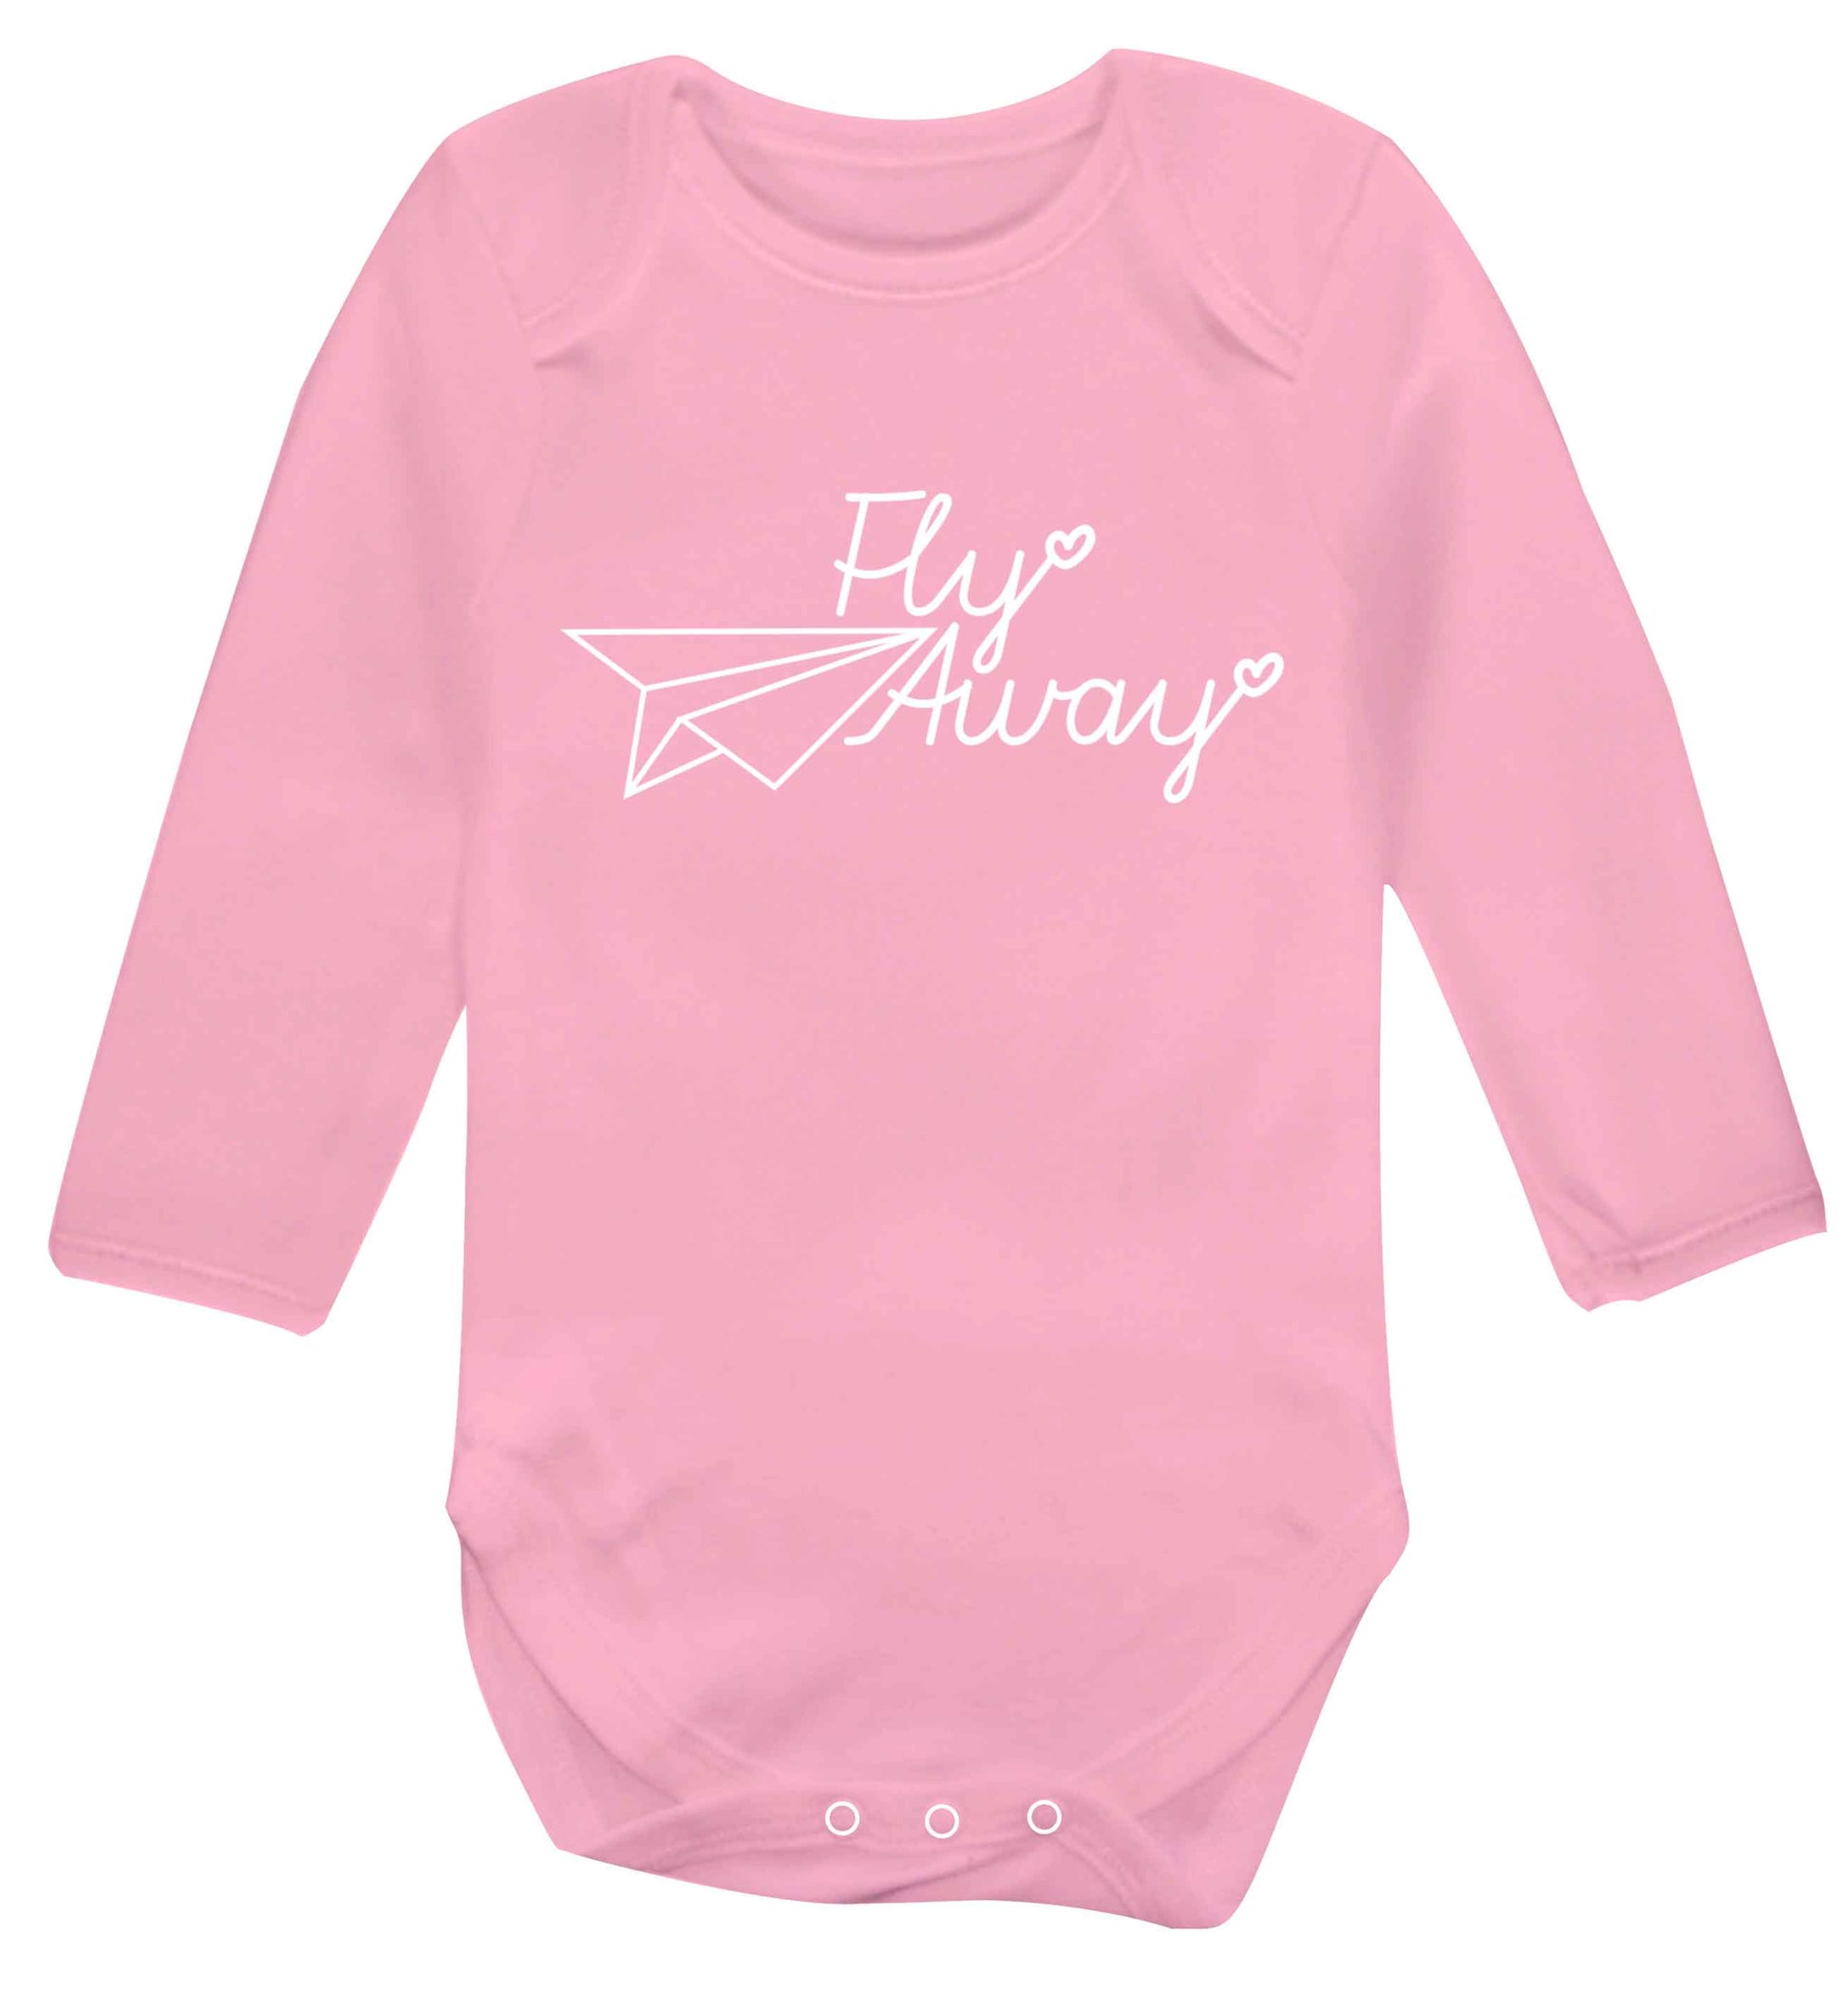 Fly away Baby Vest long sleeved pale pink 6-12 months